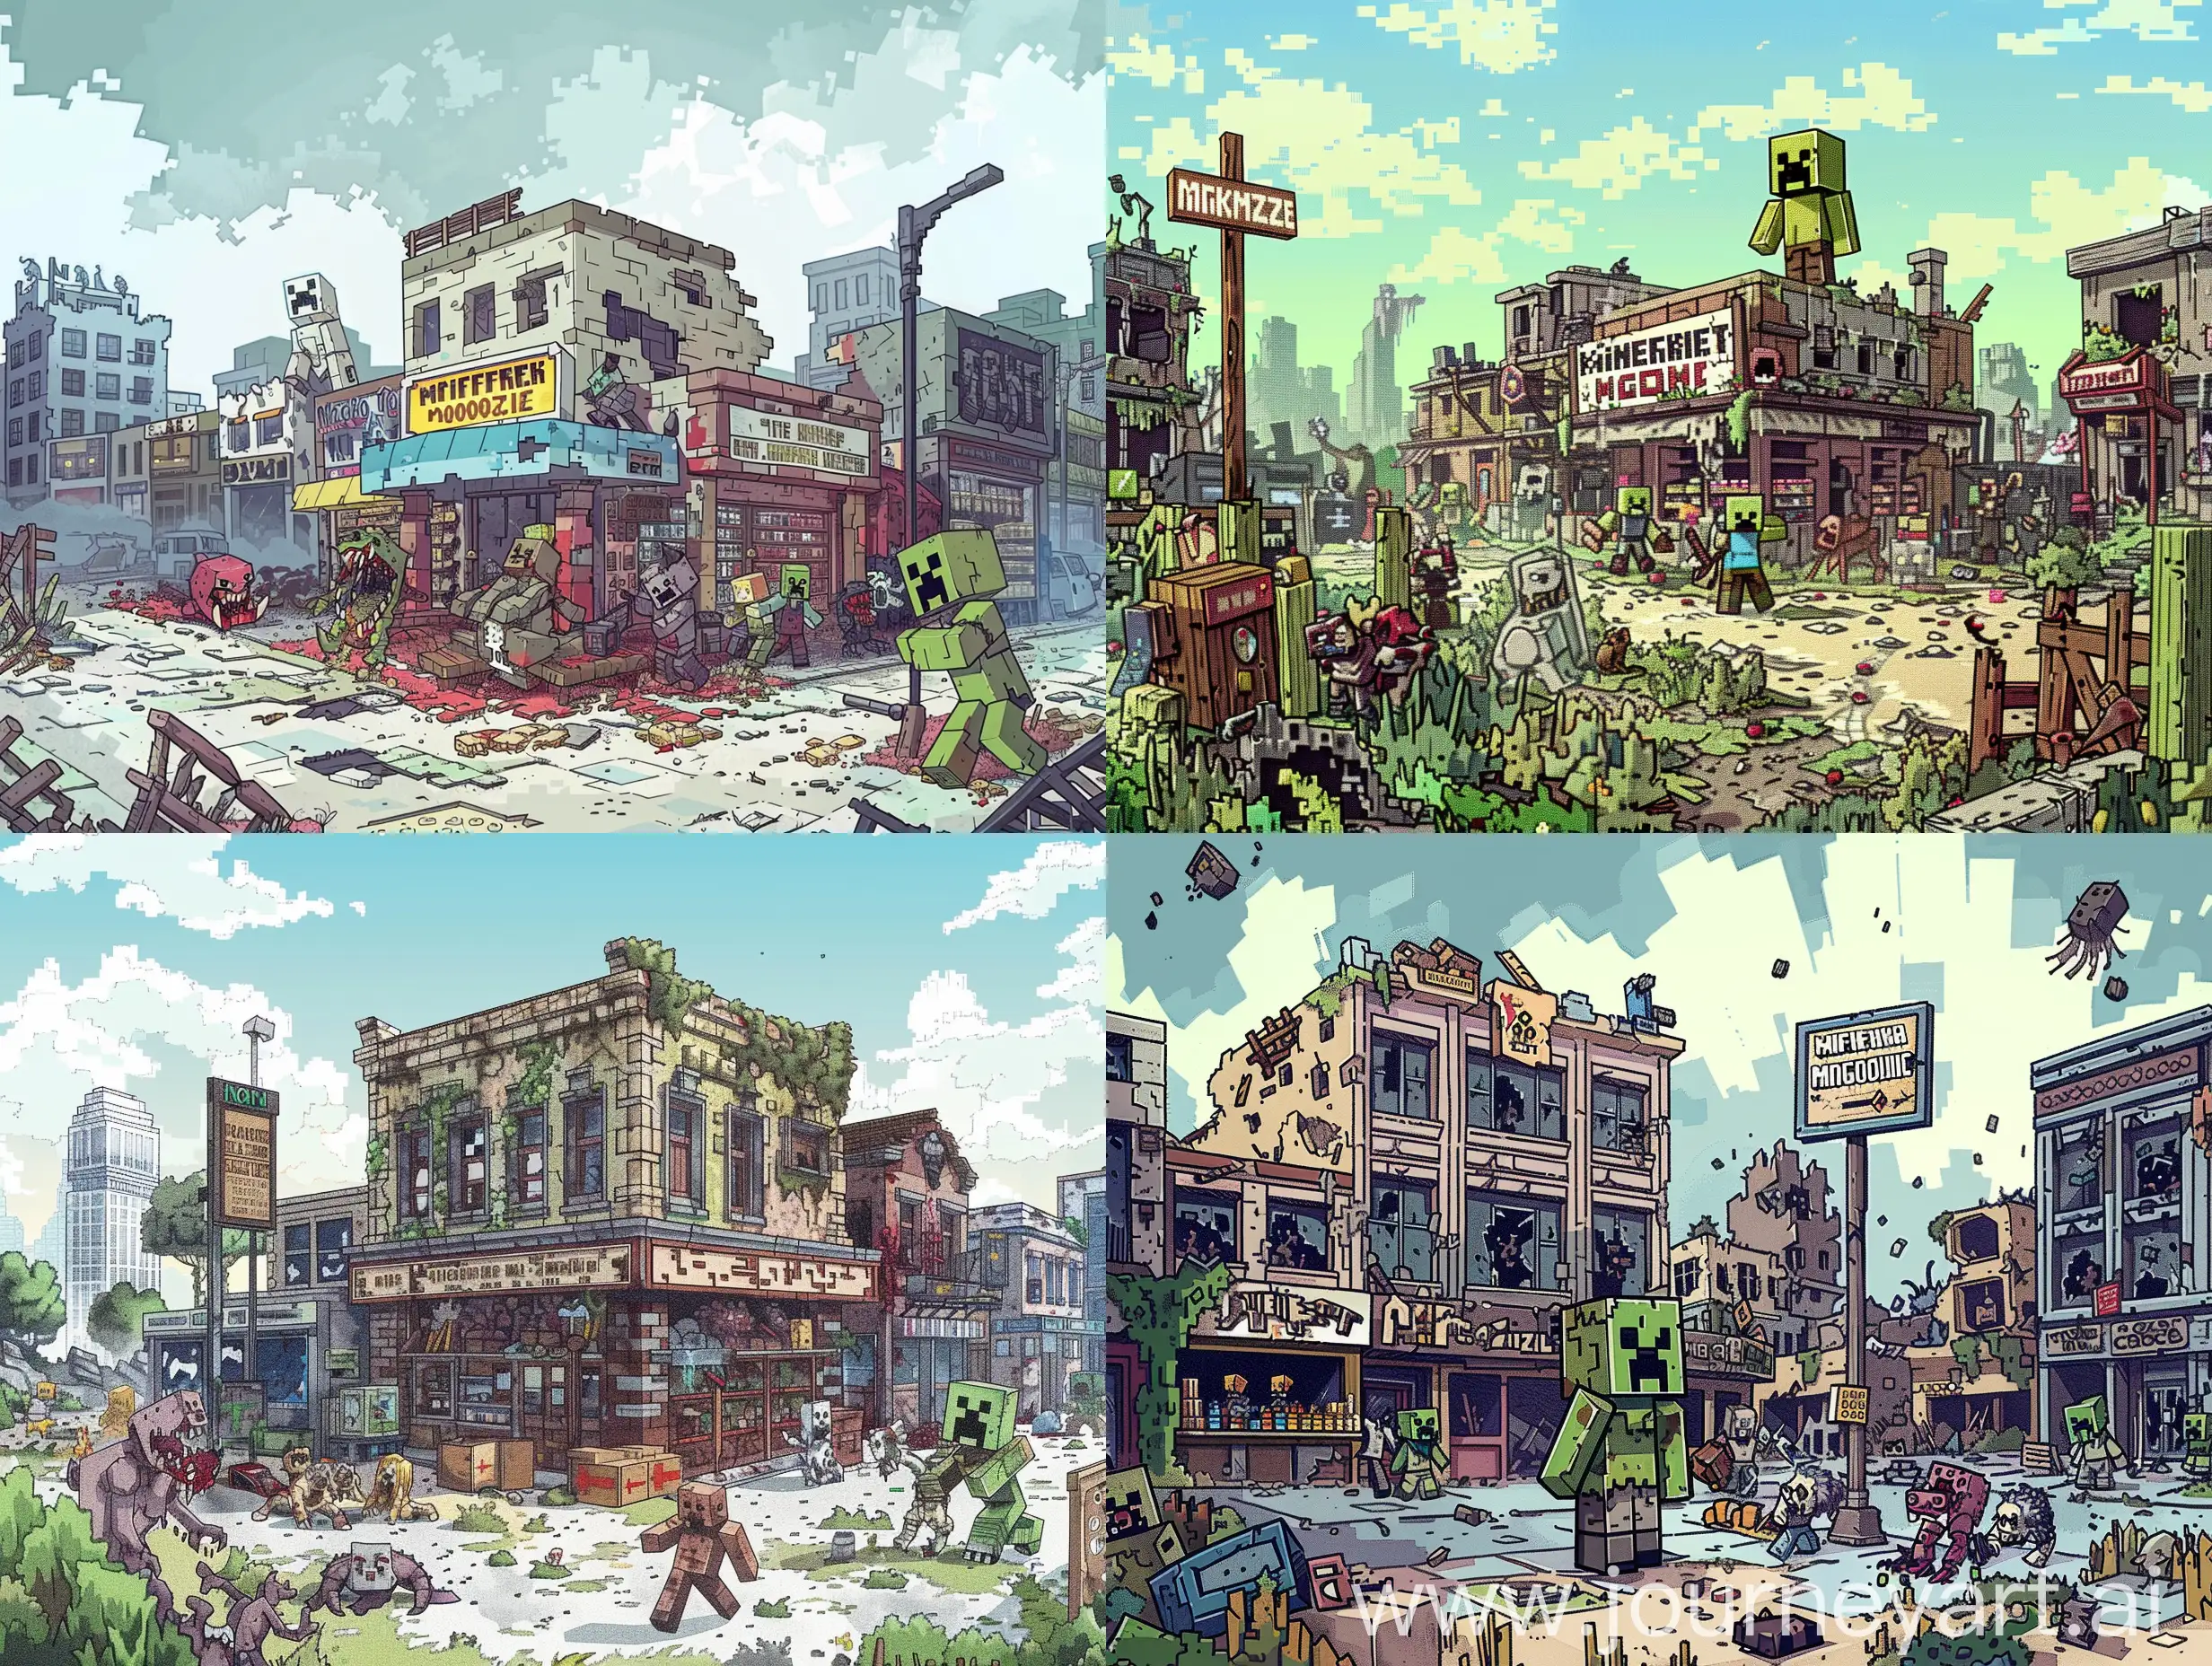 Minecraft-Movie-Graft-Cityscape-with-Store-Survivors-and-Monsters